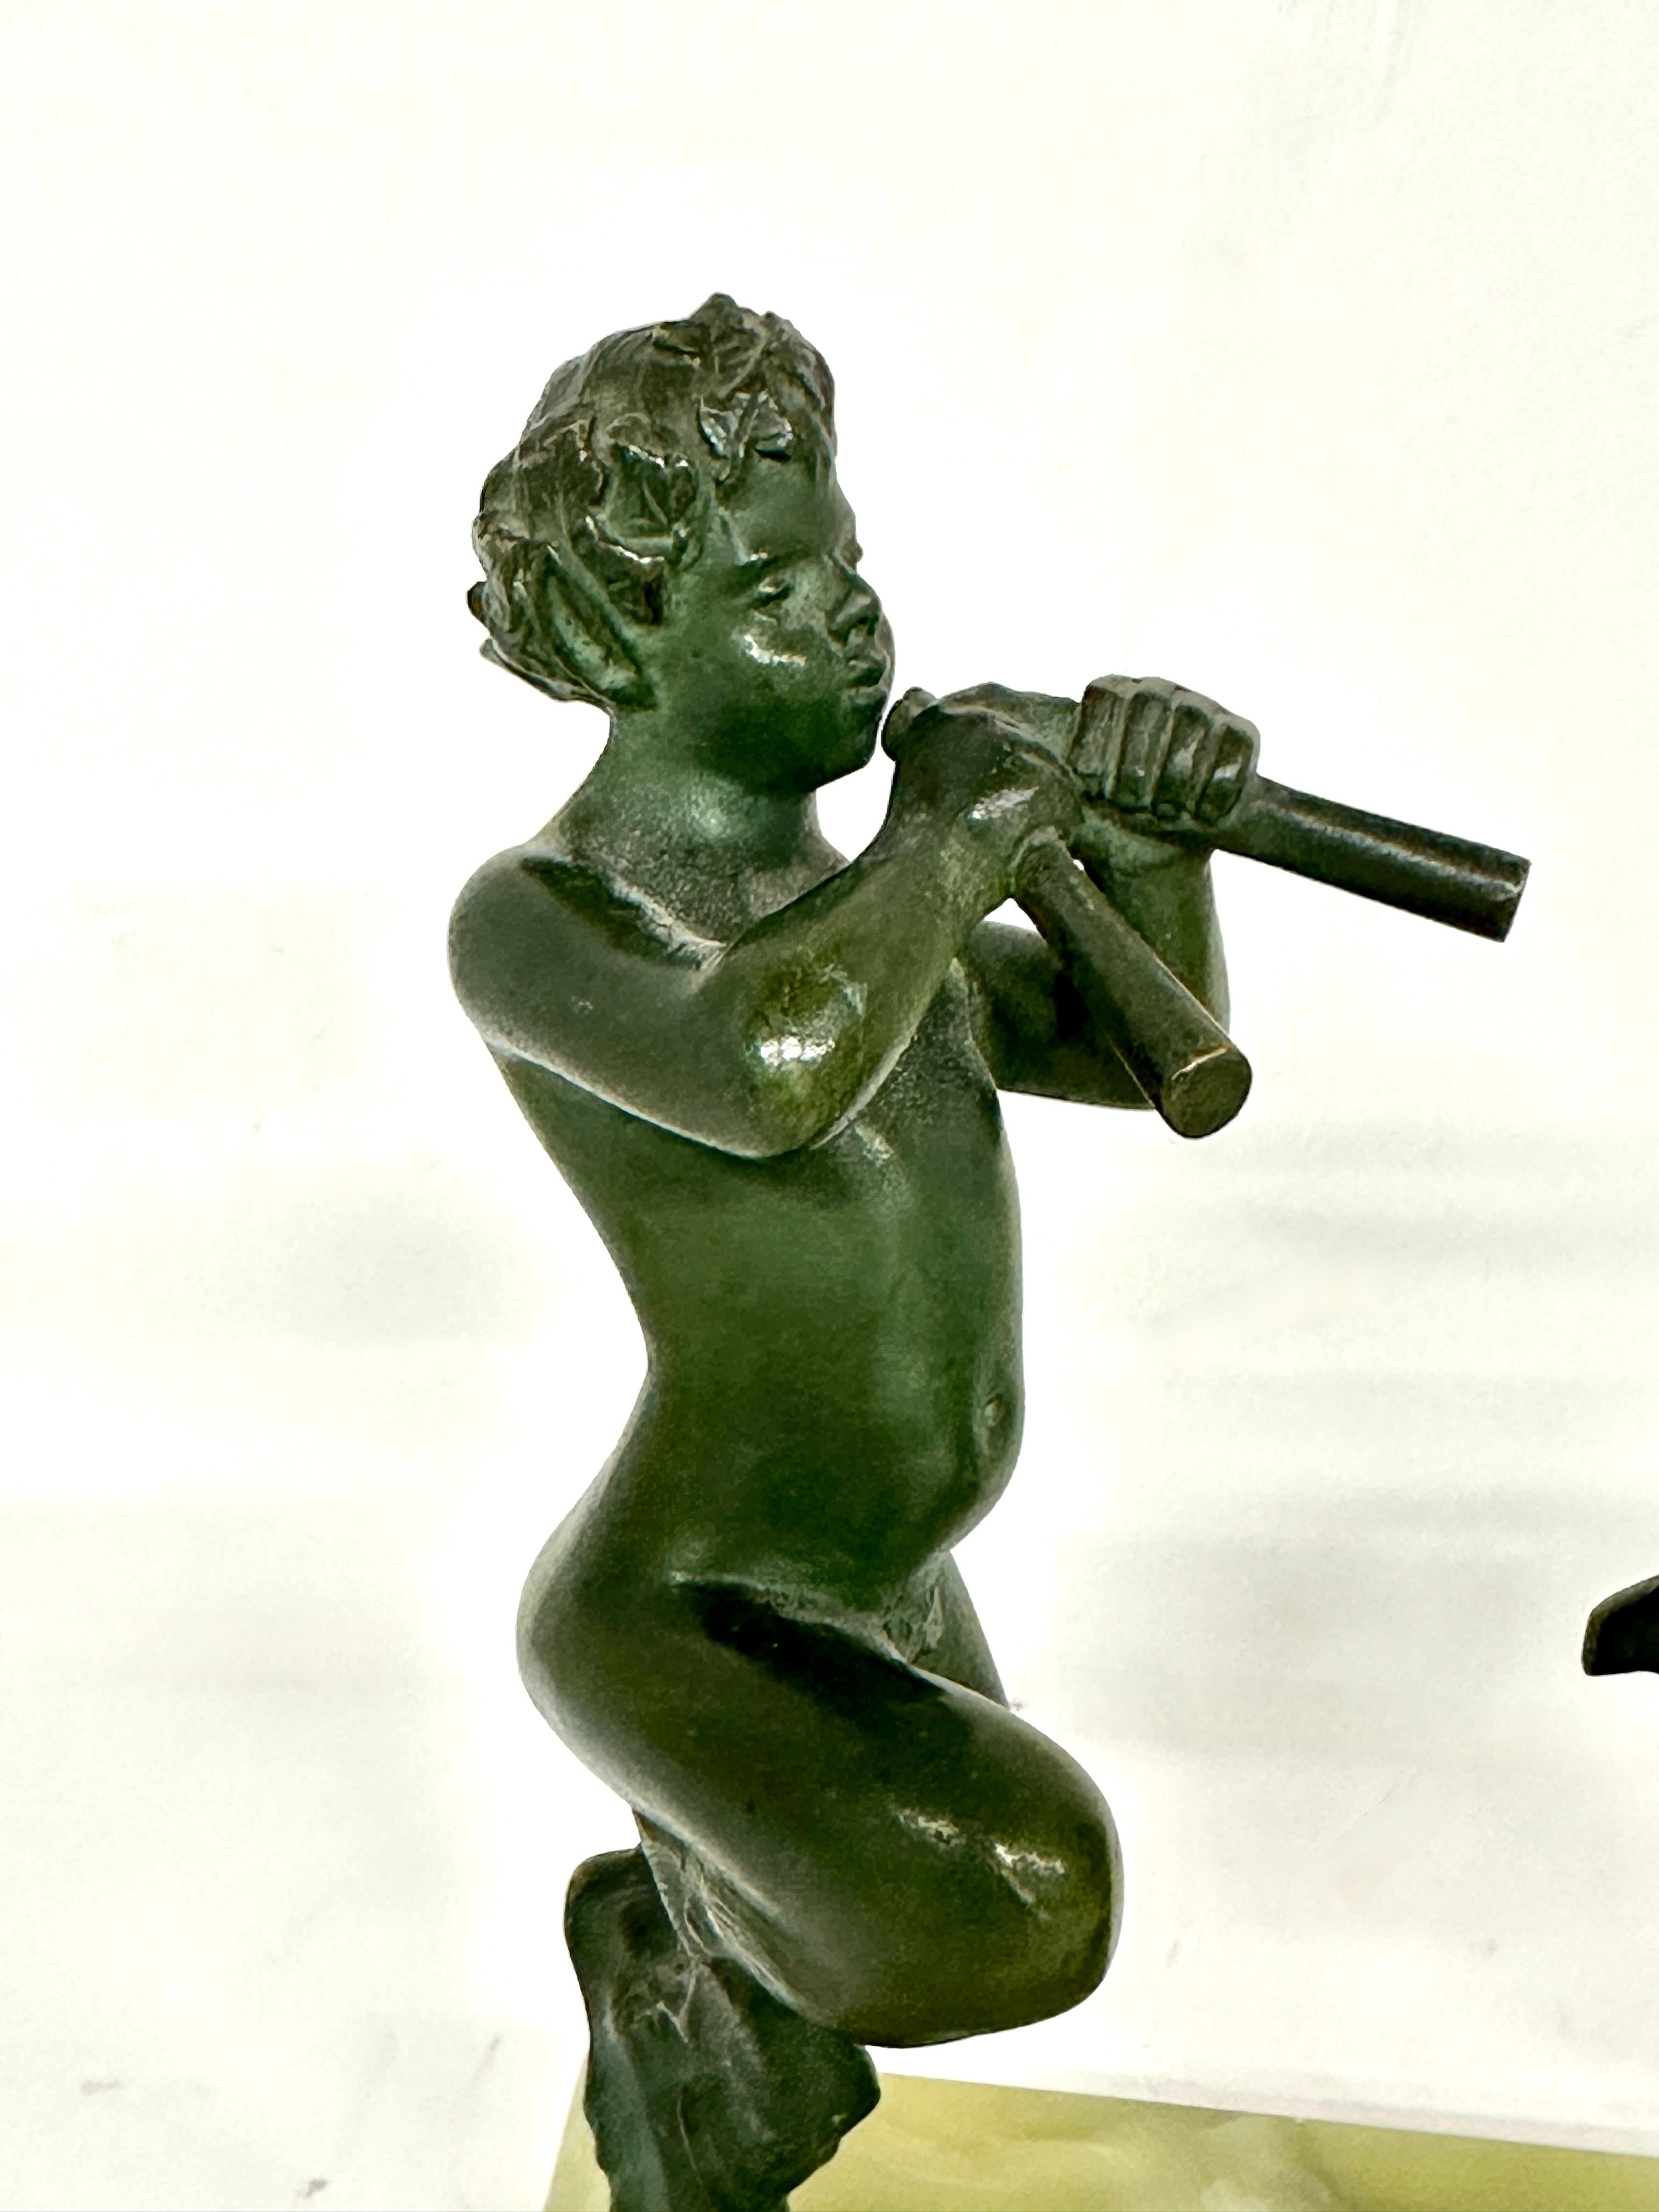 A whimsical wonderfully detailed metal sculpture of Pan playing his flutes to 2 dancing goats. Mounted on a dyed alabaster base. The sculpture is likely bronze with nice green patination. Out of the same estate as a group of Neo Classical Grand Tour